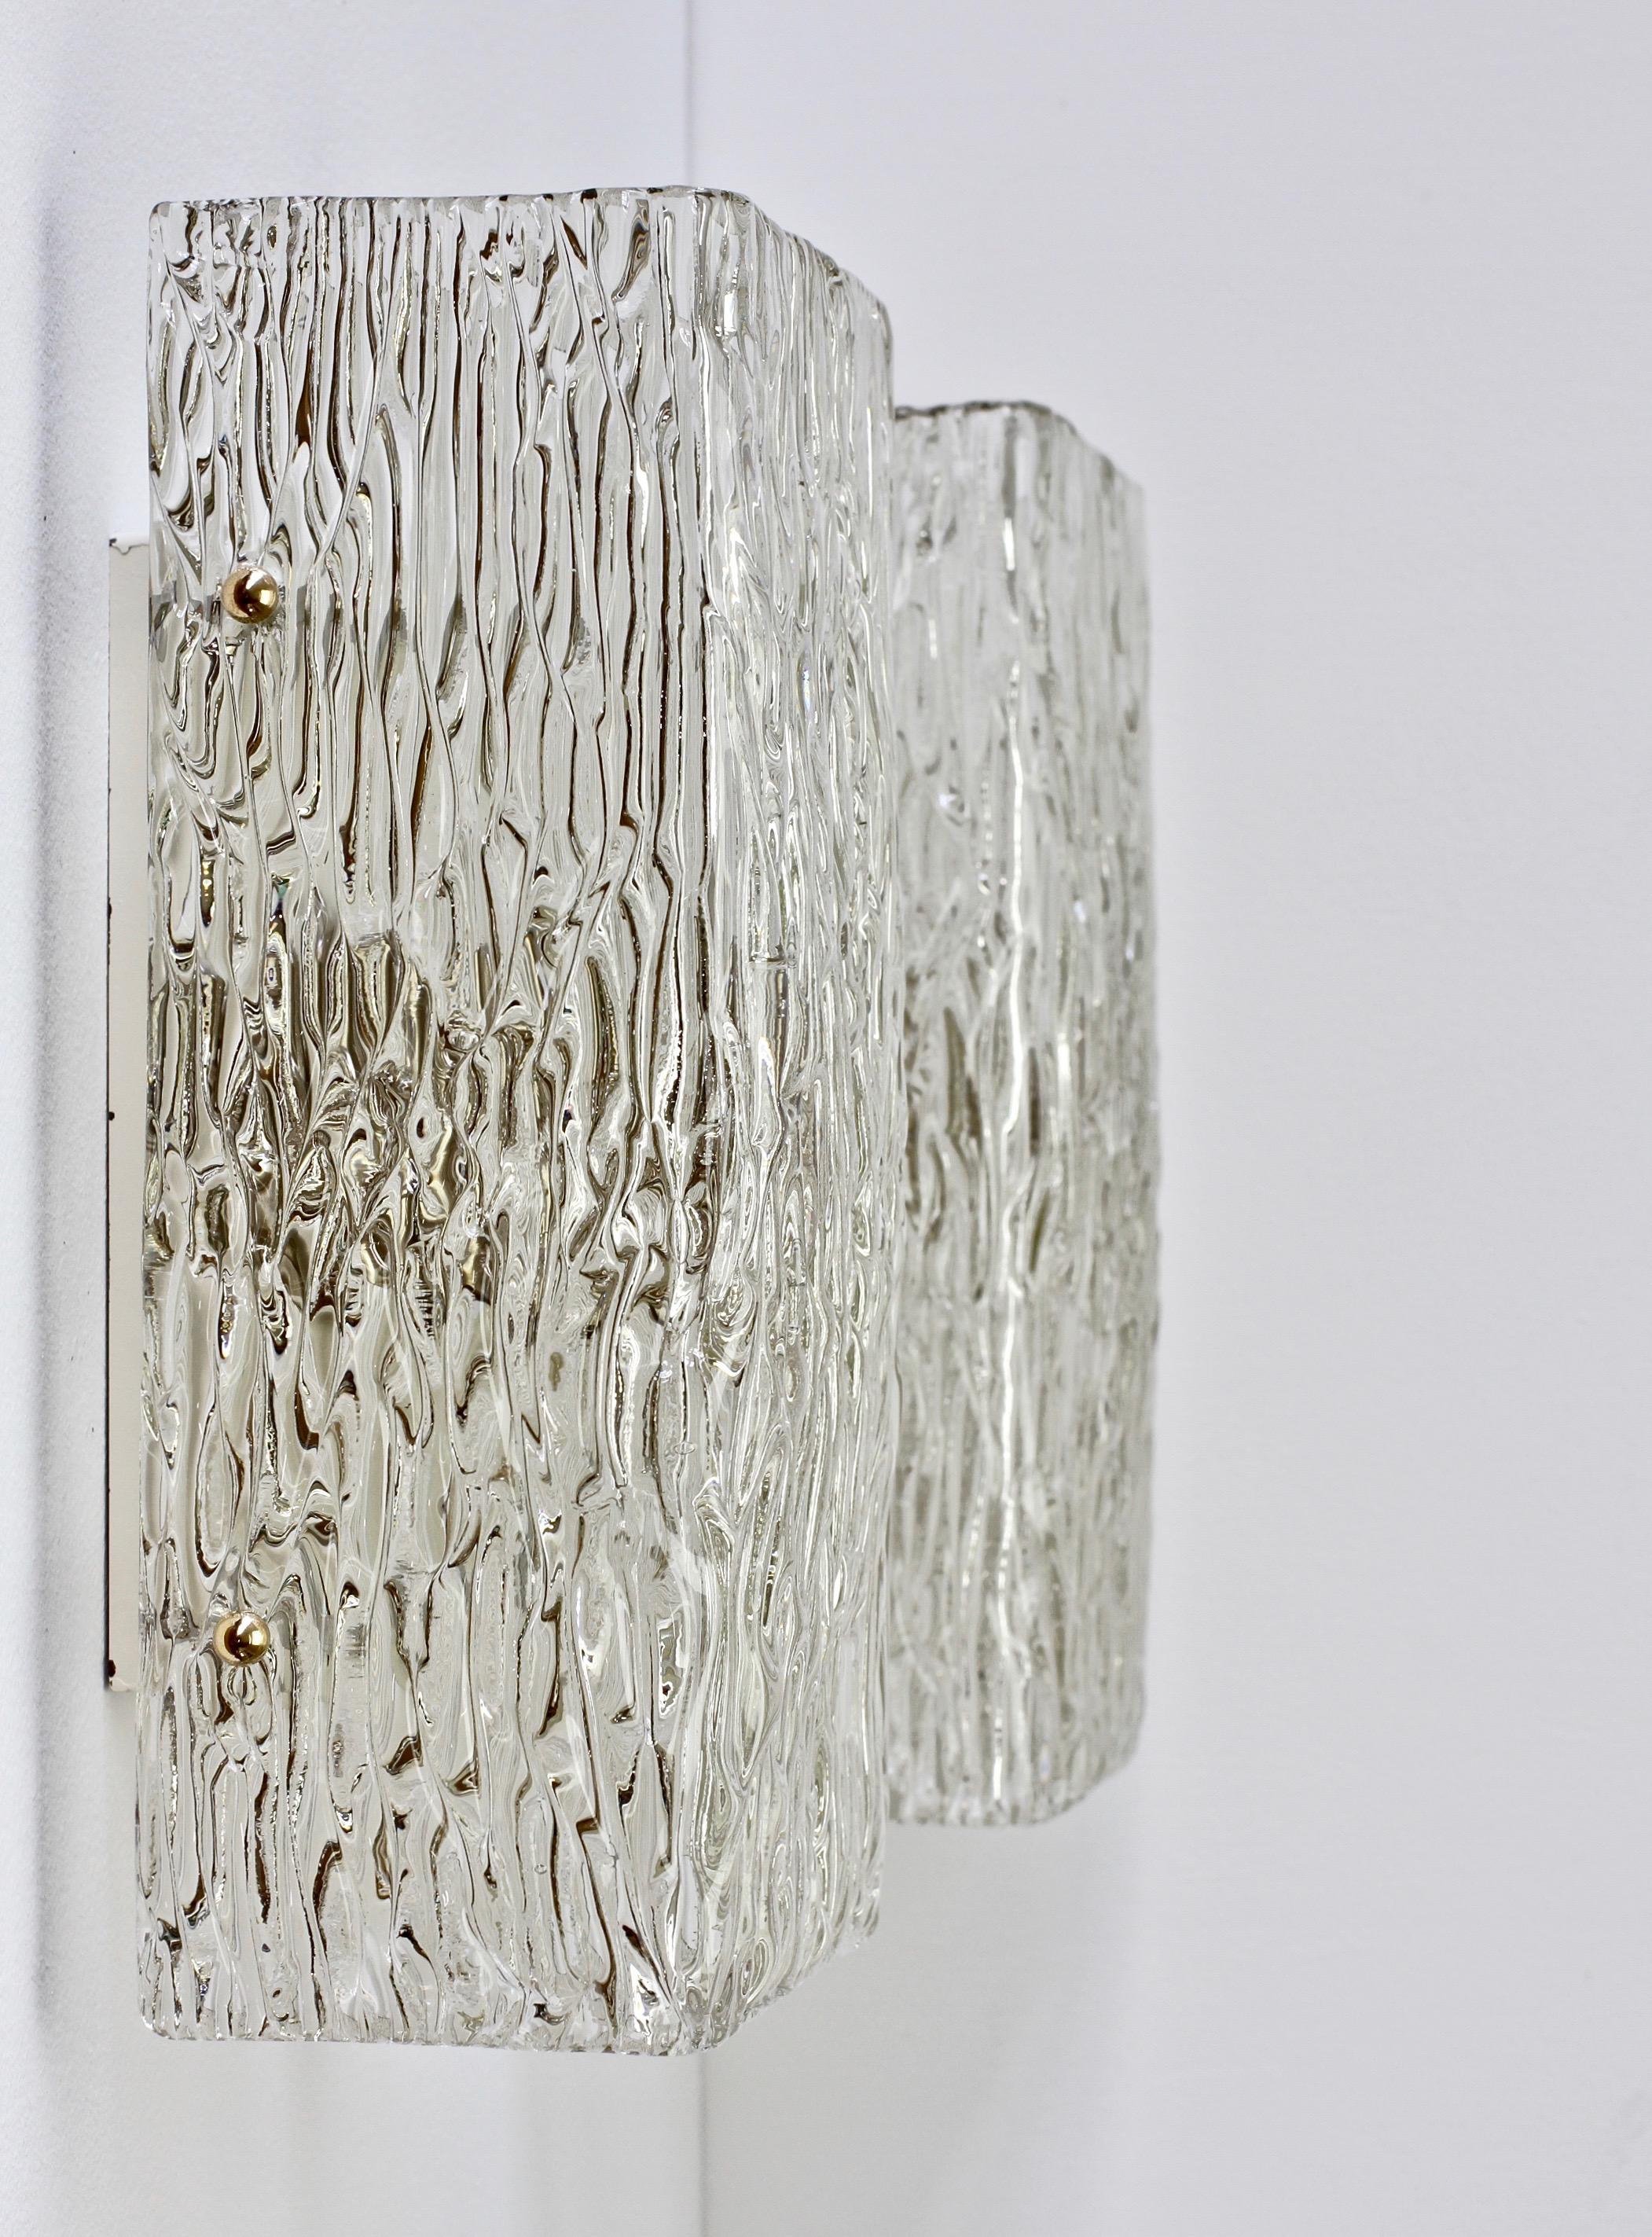 Polished 1 of 4 Large Austrian Textured Glass Wall Lights or Sconces by JT Kalmar c. 1955 For Sale